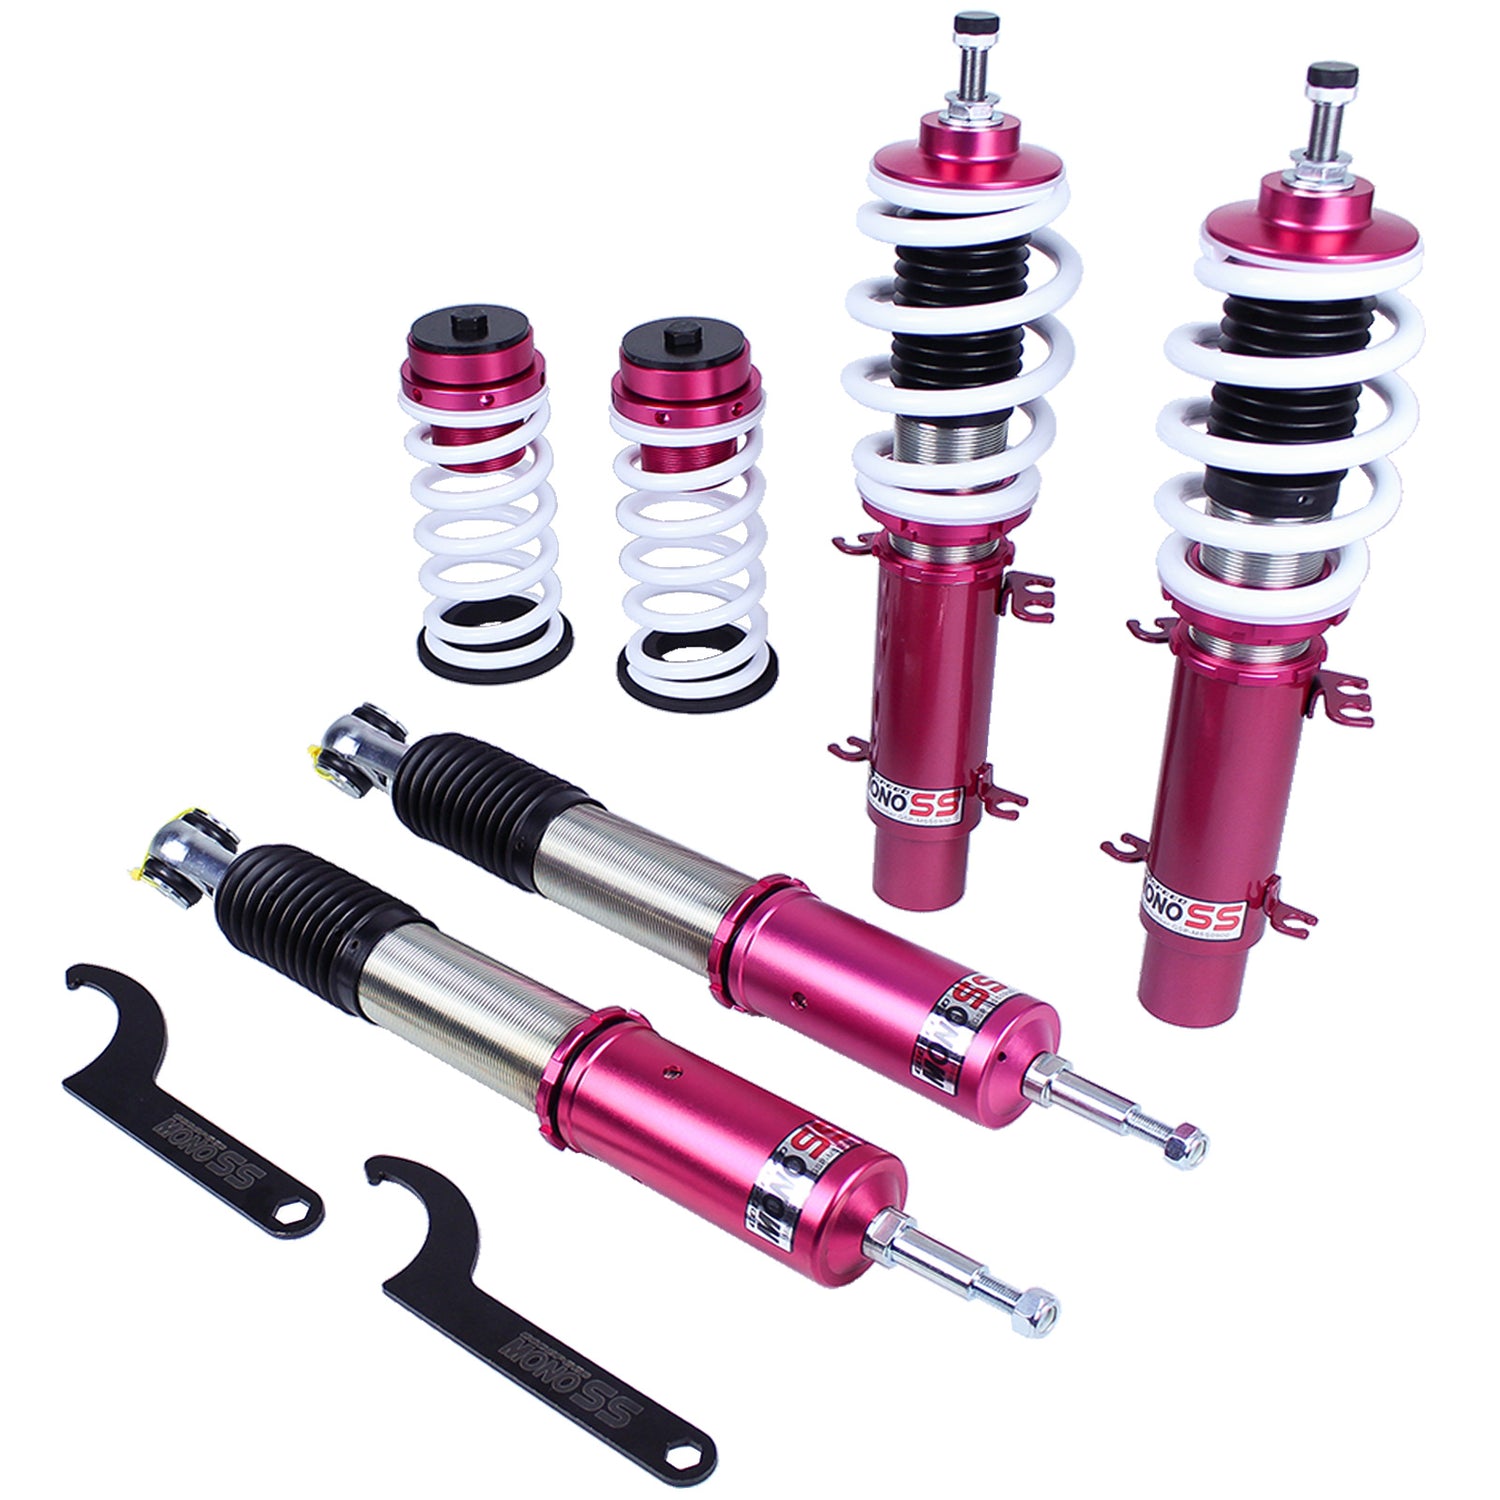 Godspeed MSS0900-B MonoSS Coilover Lowering Kit, Fully Adjustable, Ride Height, Spring Tension And 16 Click Damping, Volkswagen Jetta(MK4) 1999-04